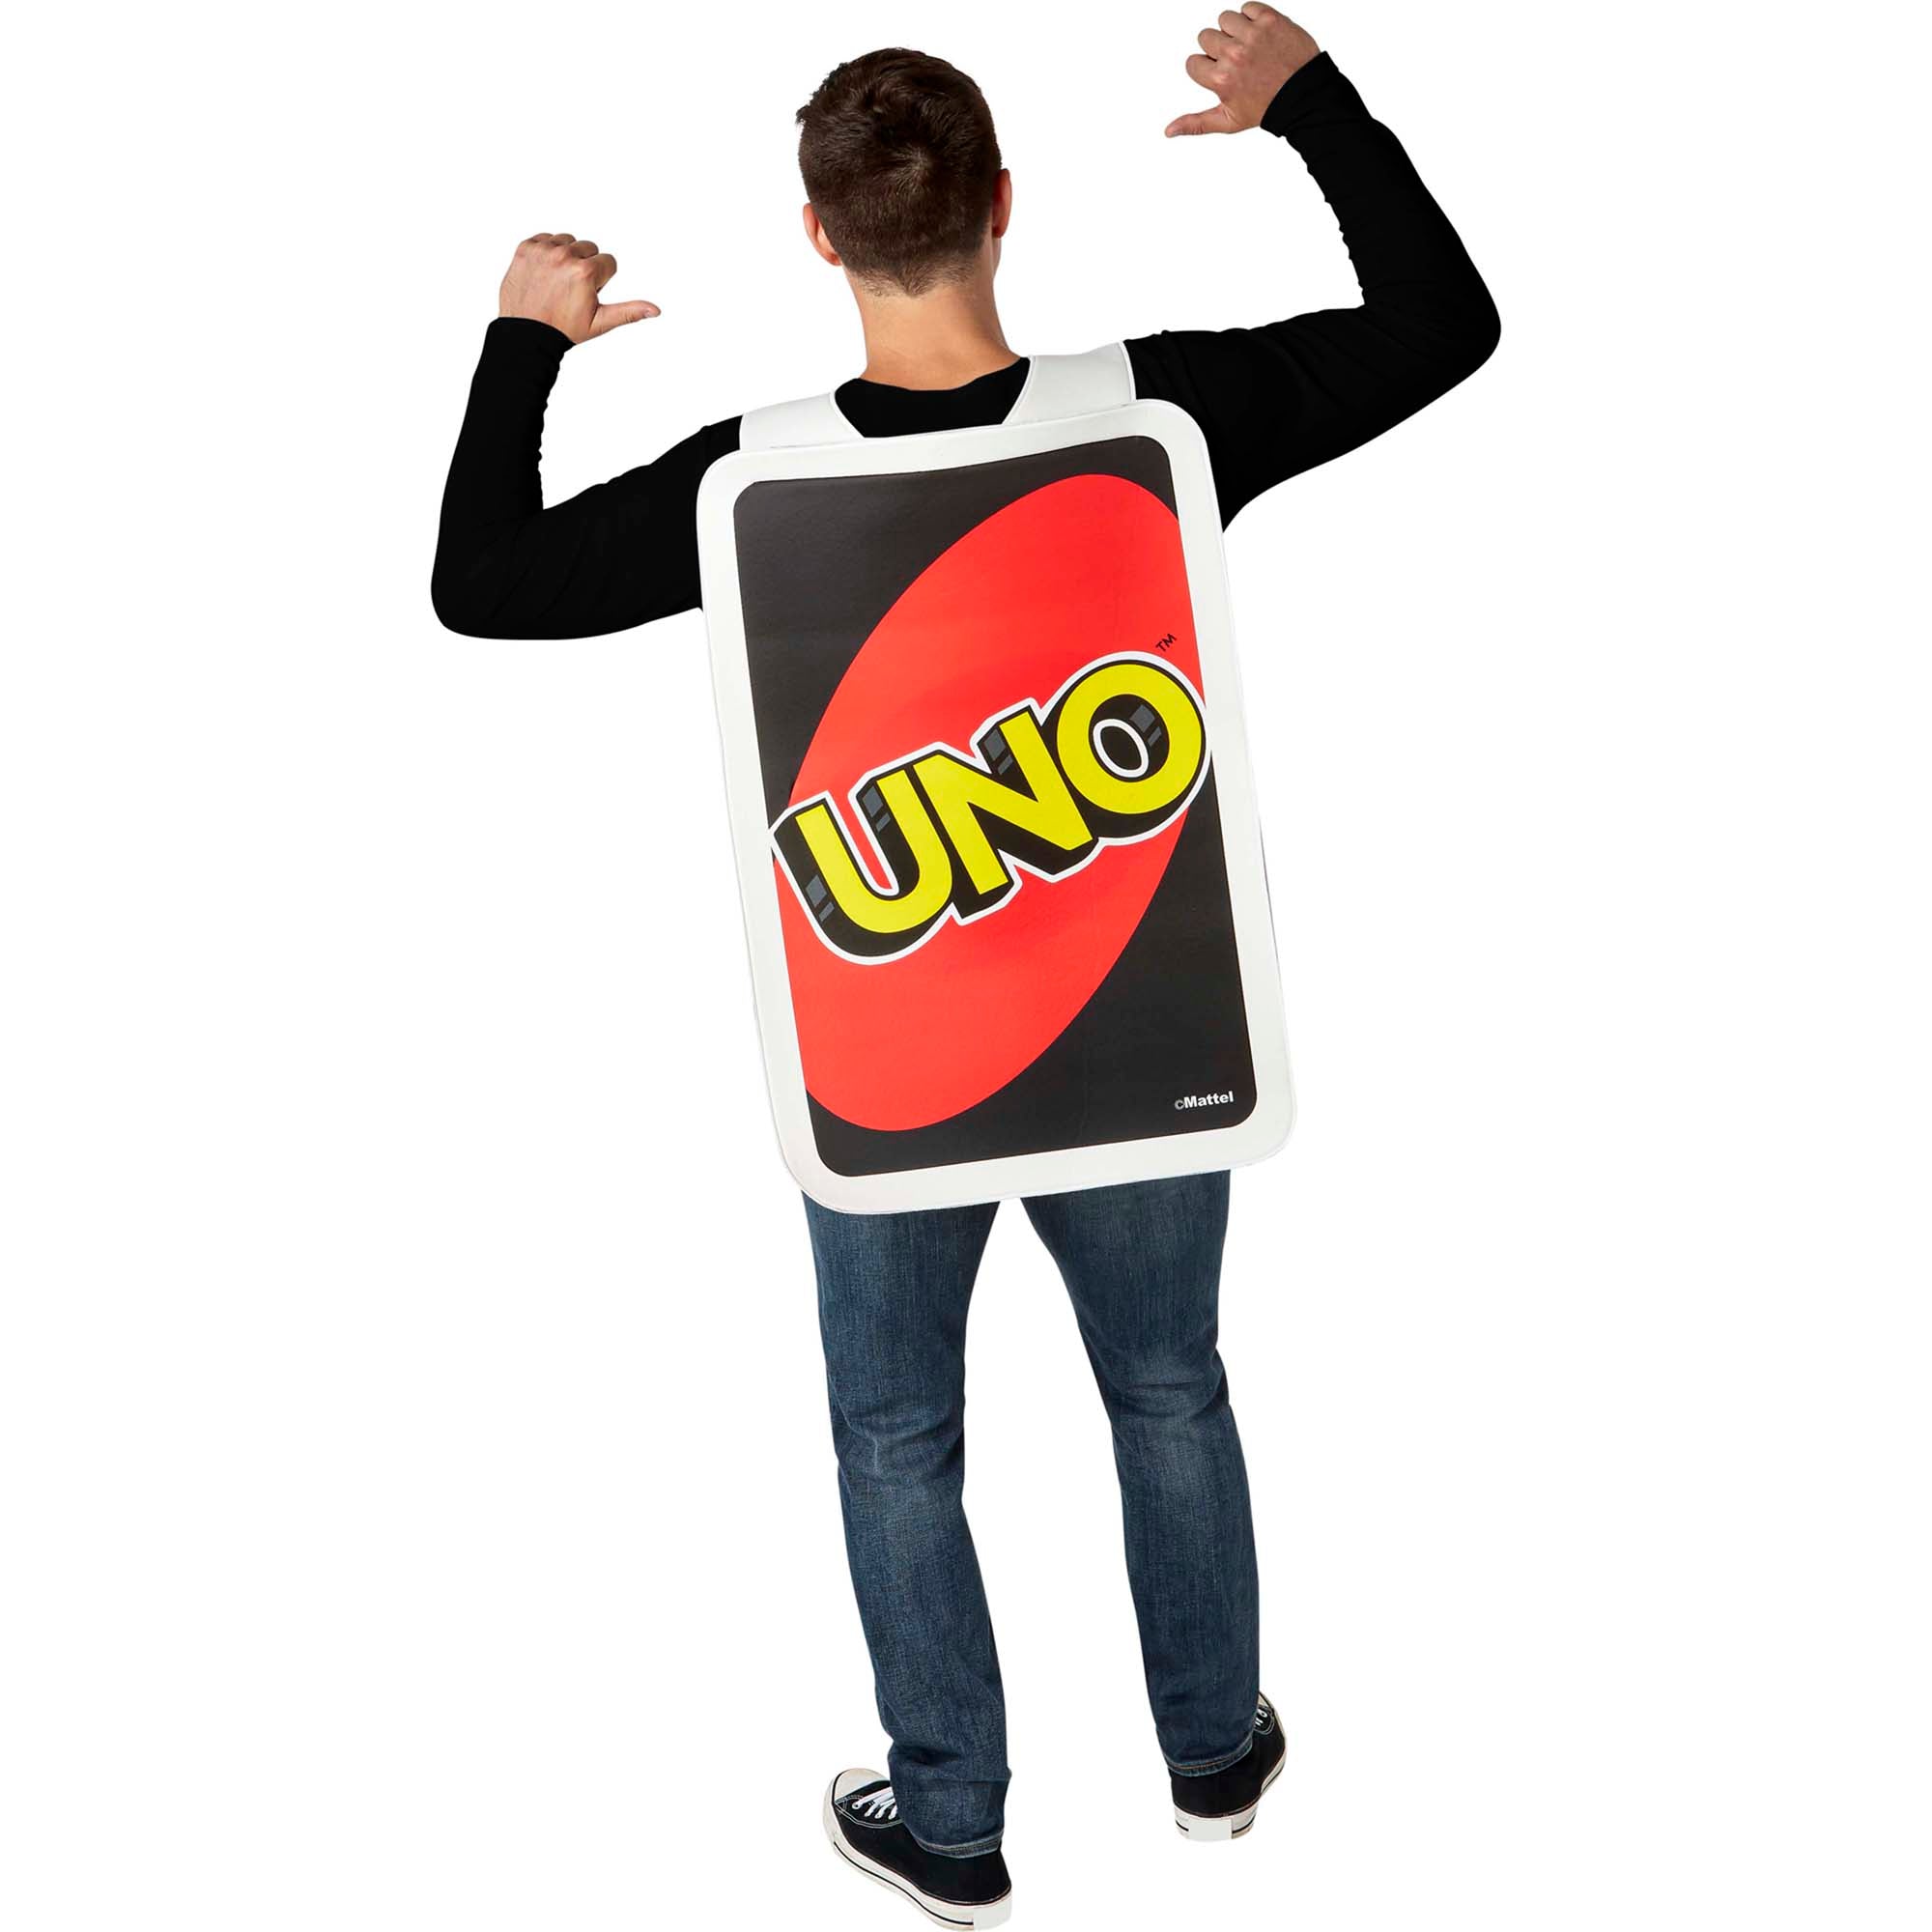 The Reverse card of Uno. A one time use item. When used, It is